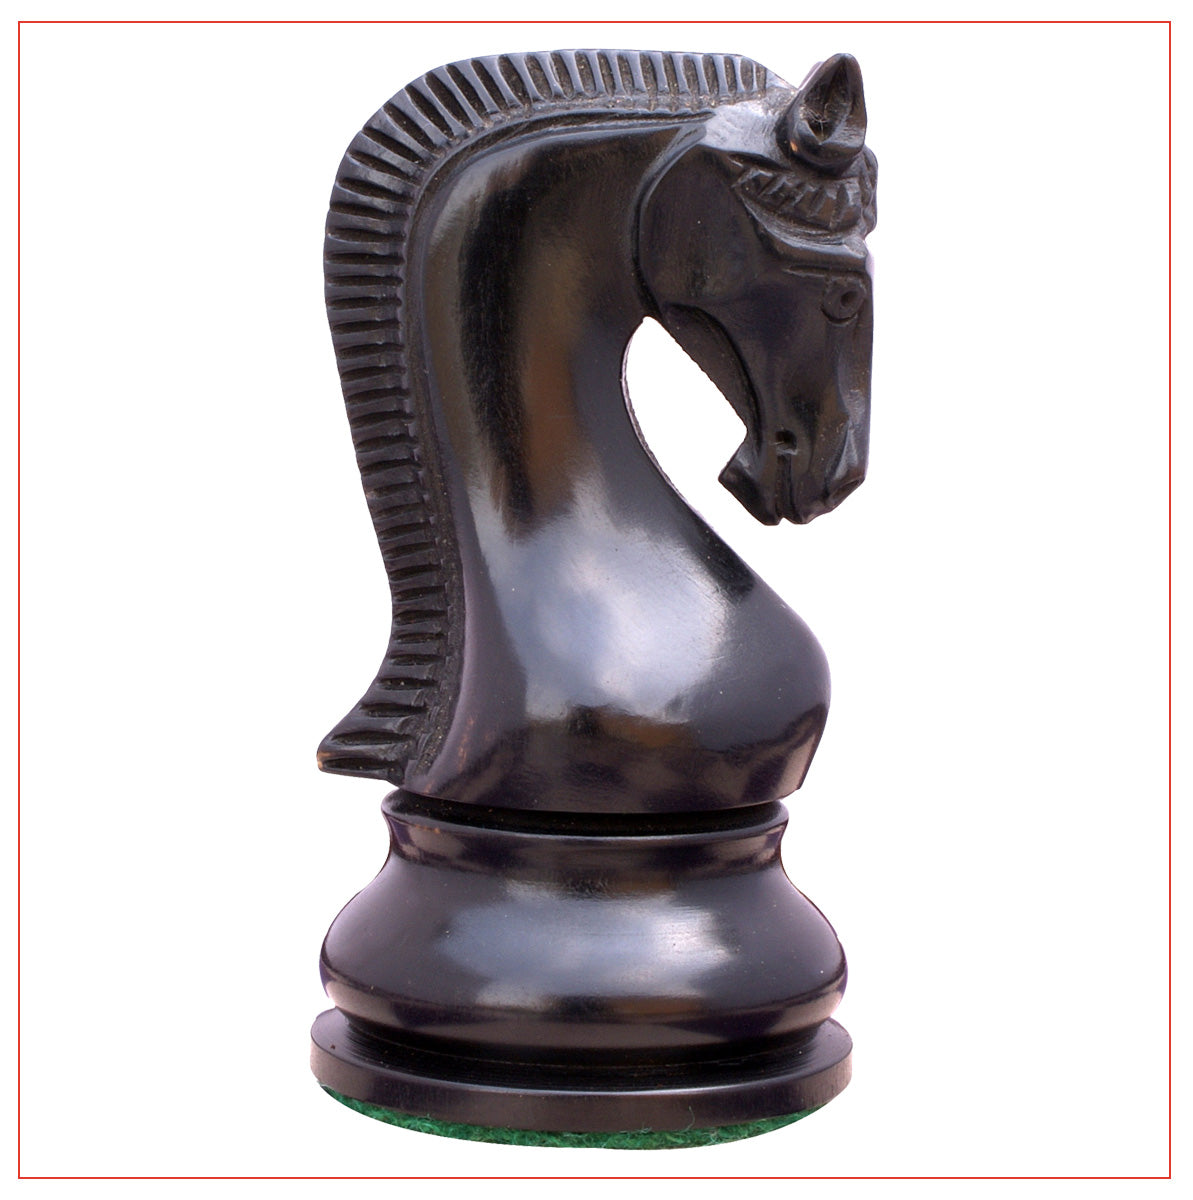 4 1/4 Ultraweight Black and White Resin Staunton Chess Pieces